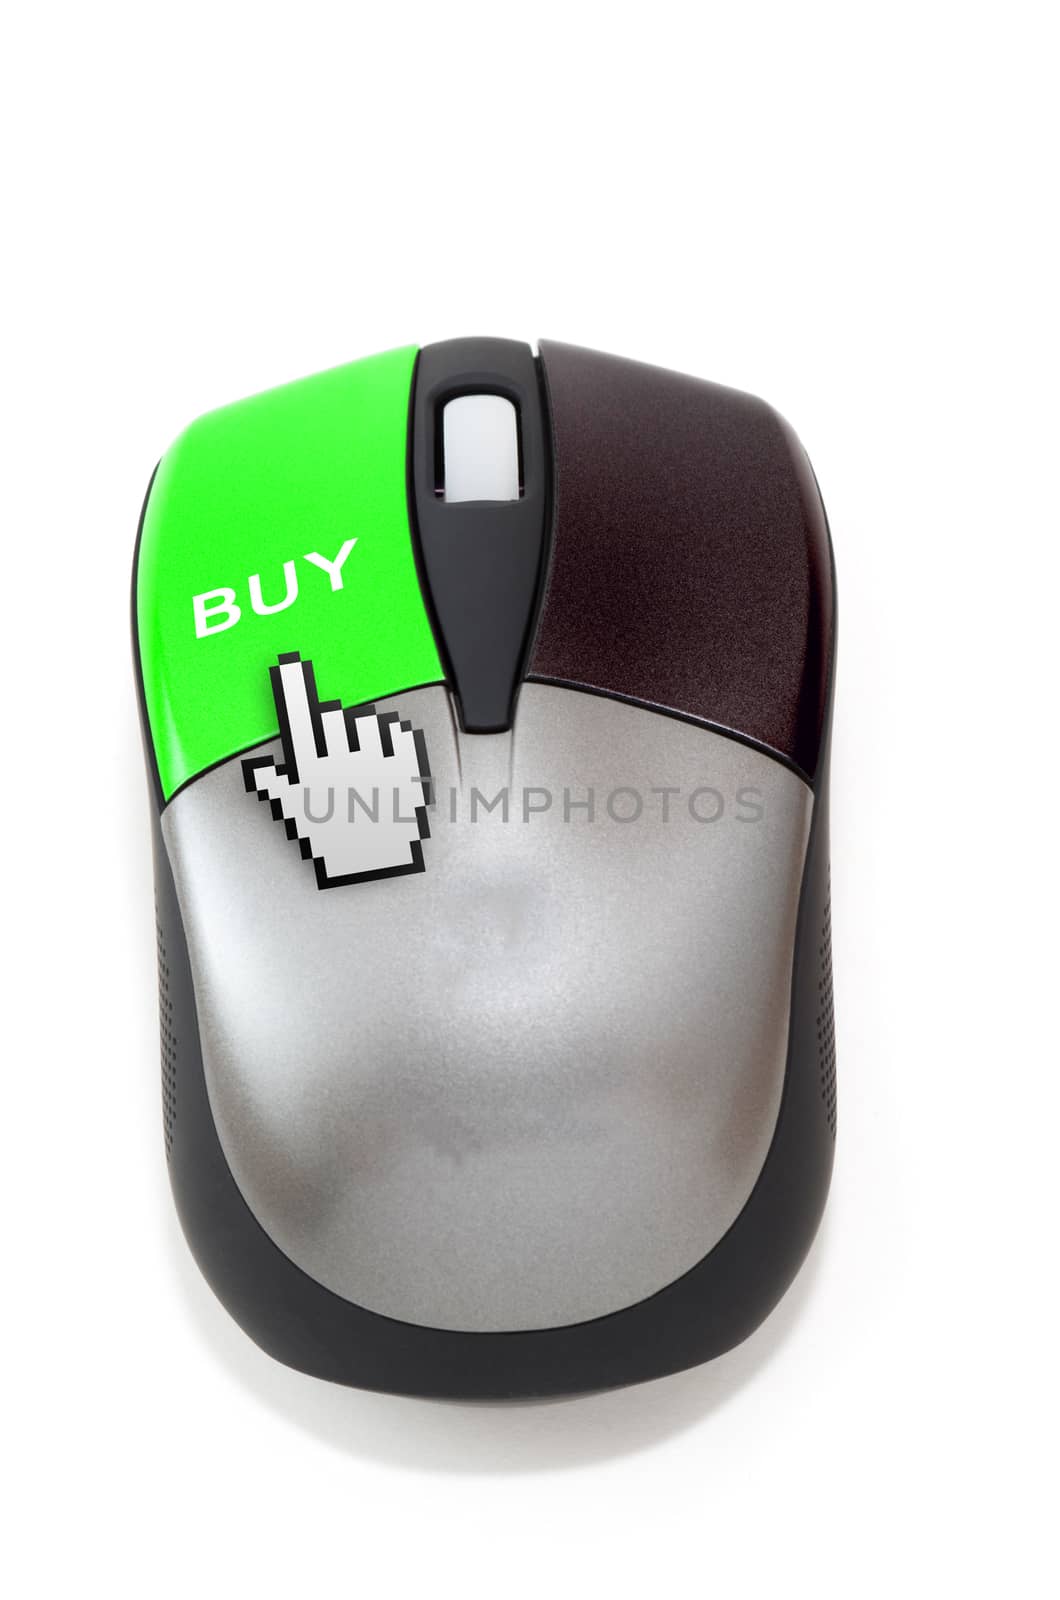 Hand cursor clicking on buy button